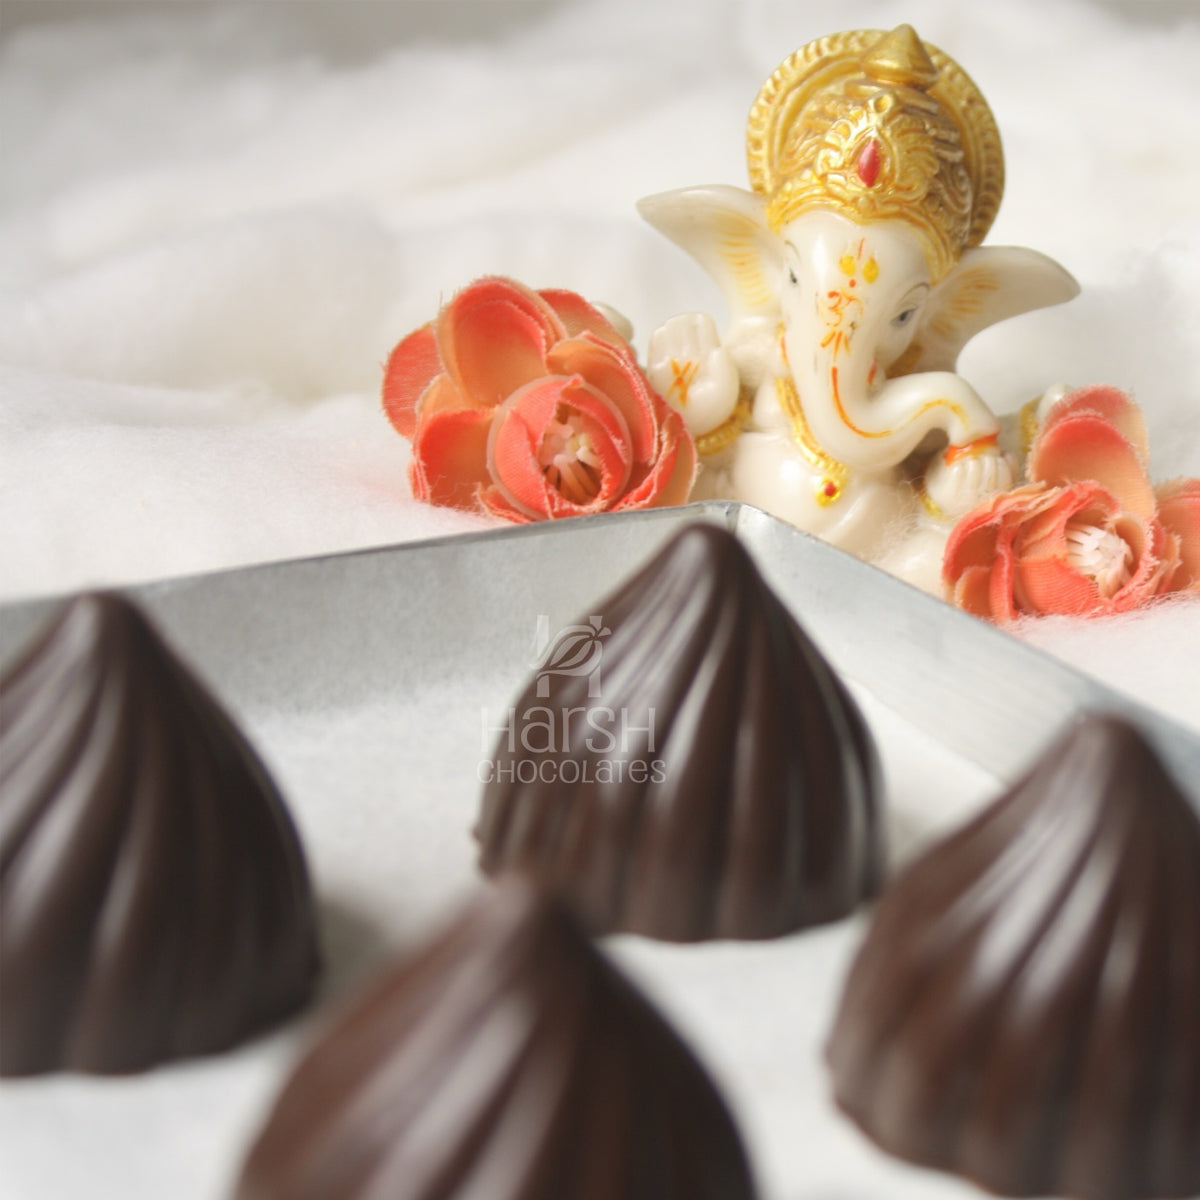 Ganesh Chaturthi : Modak is a very popular dessert, especially made for Ganesh Chaturthi and is available in a variety of options.